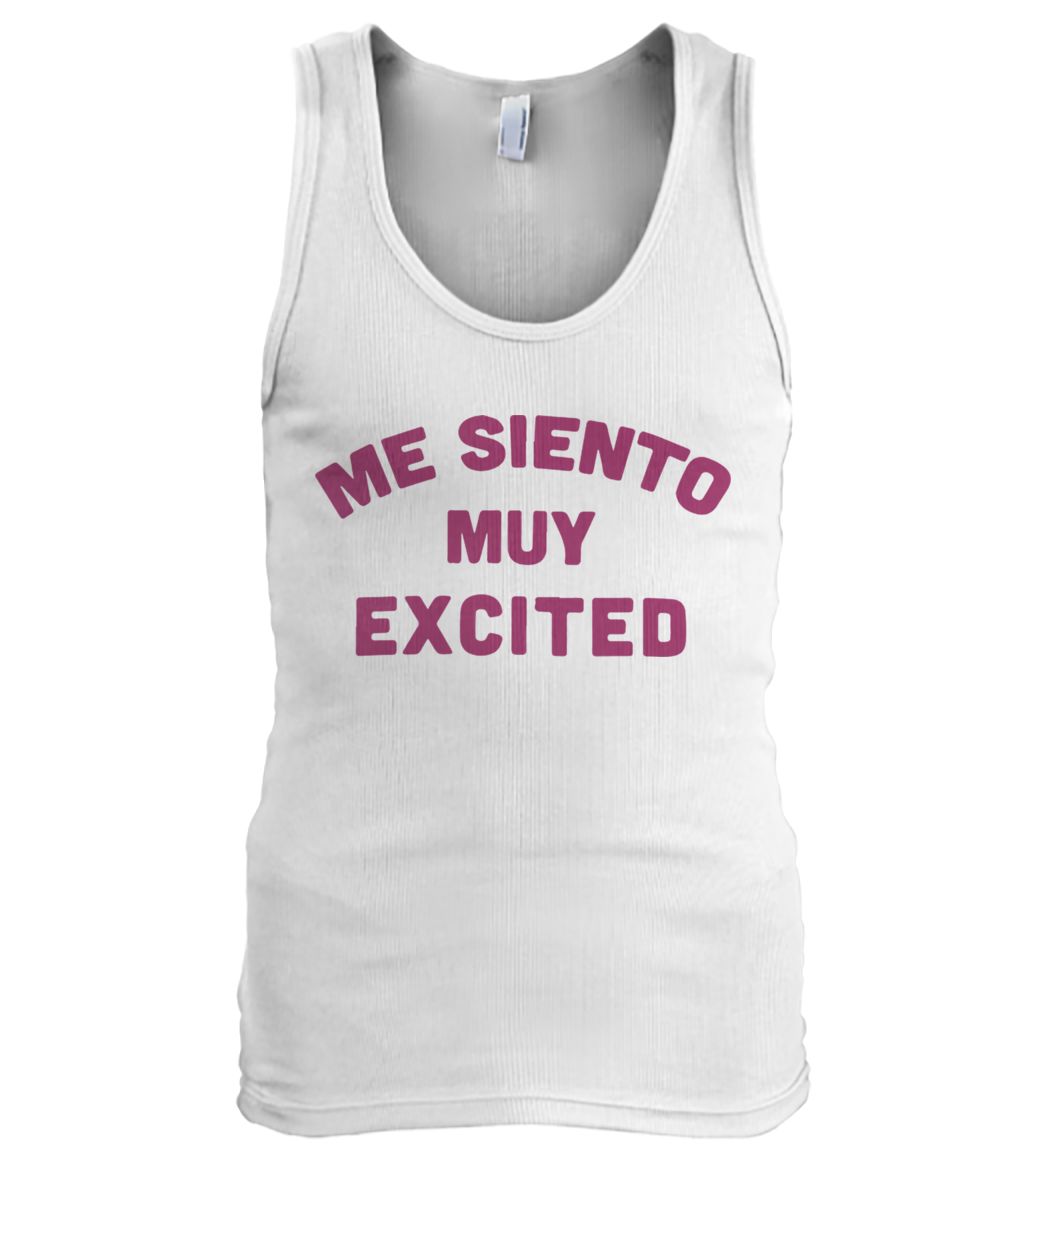 Me siento muy excited men's tank top